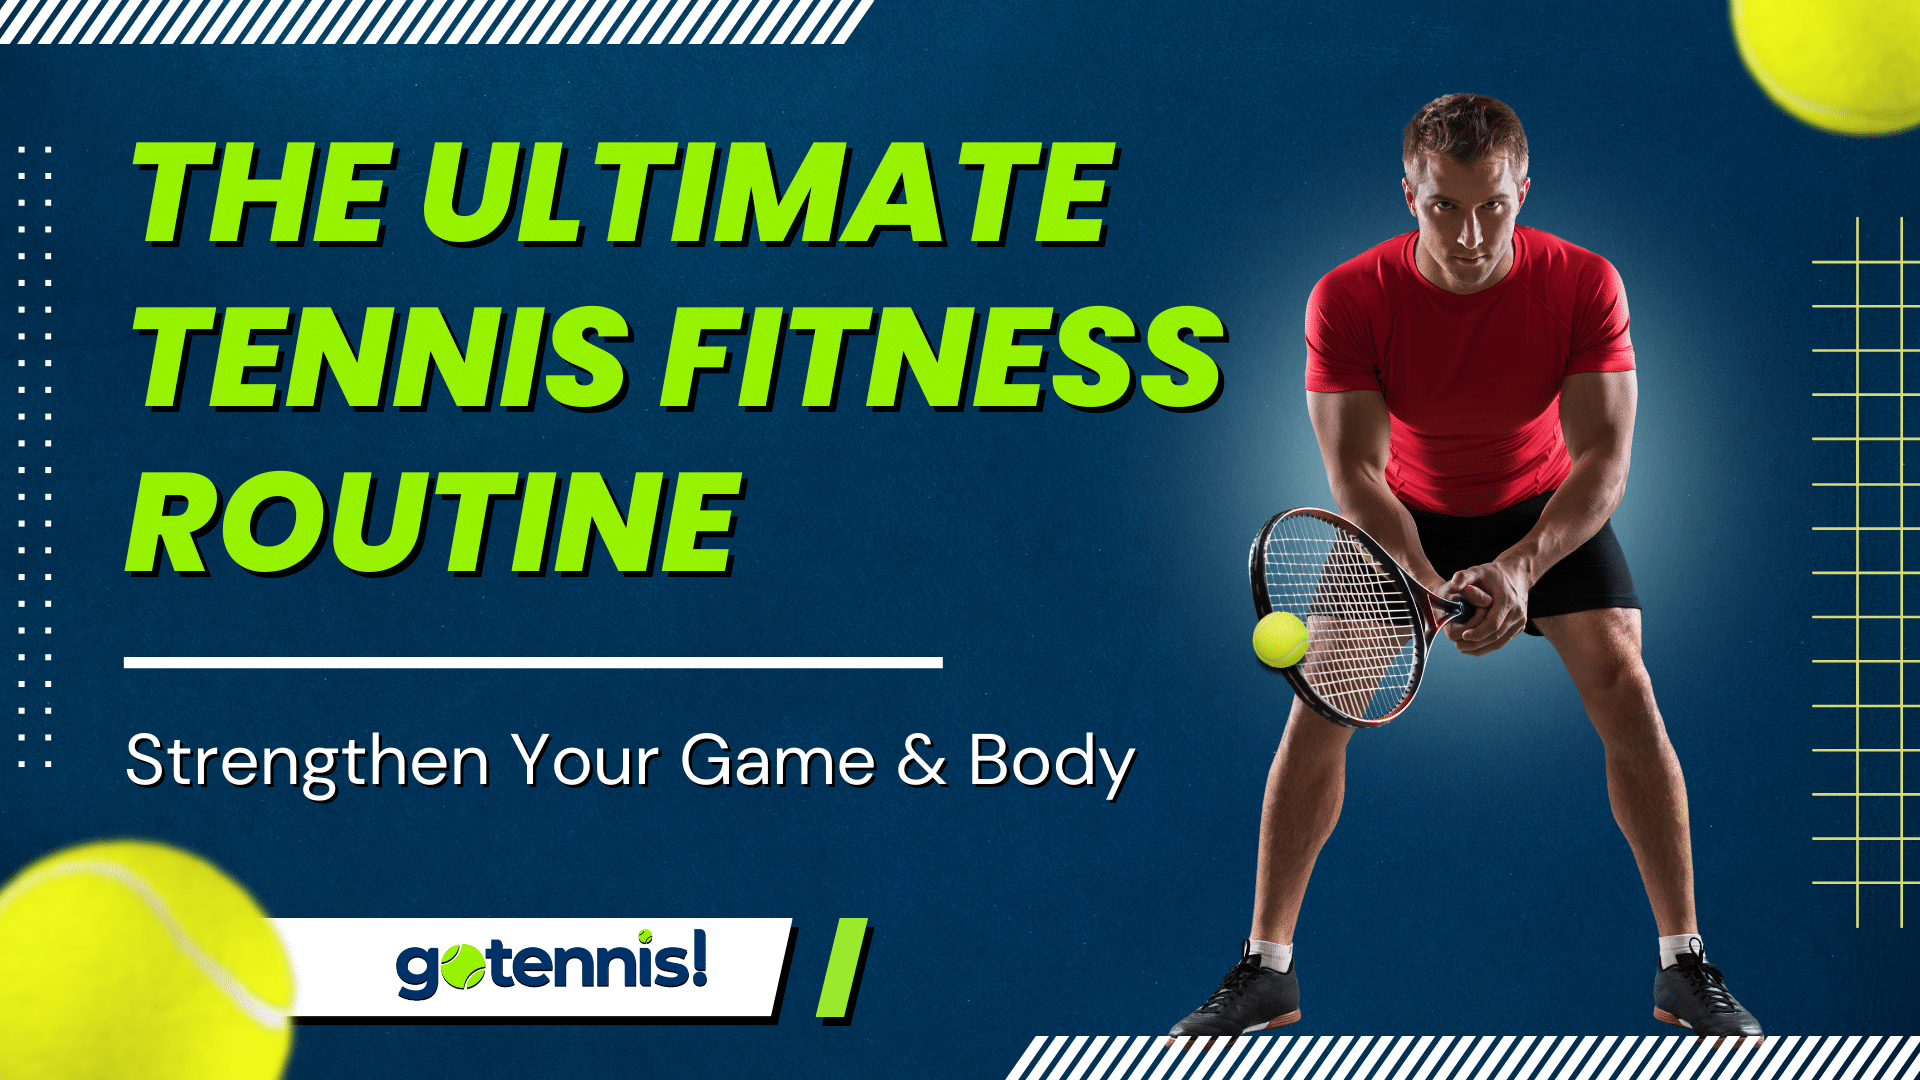 The Ultimate Tennis Fitness Routine post featured image